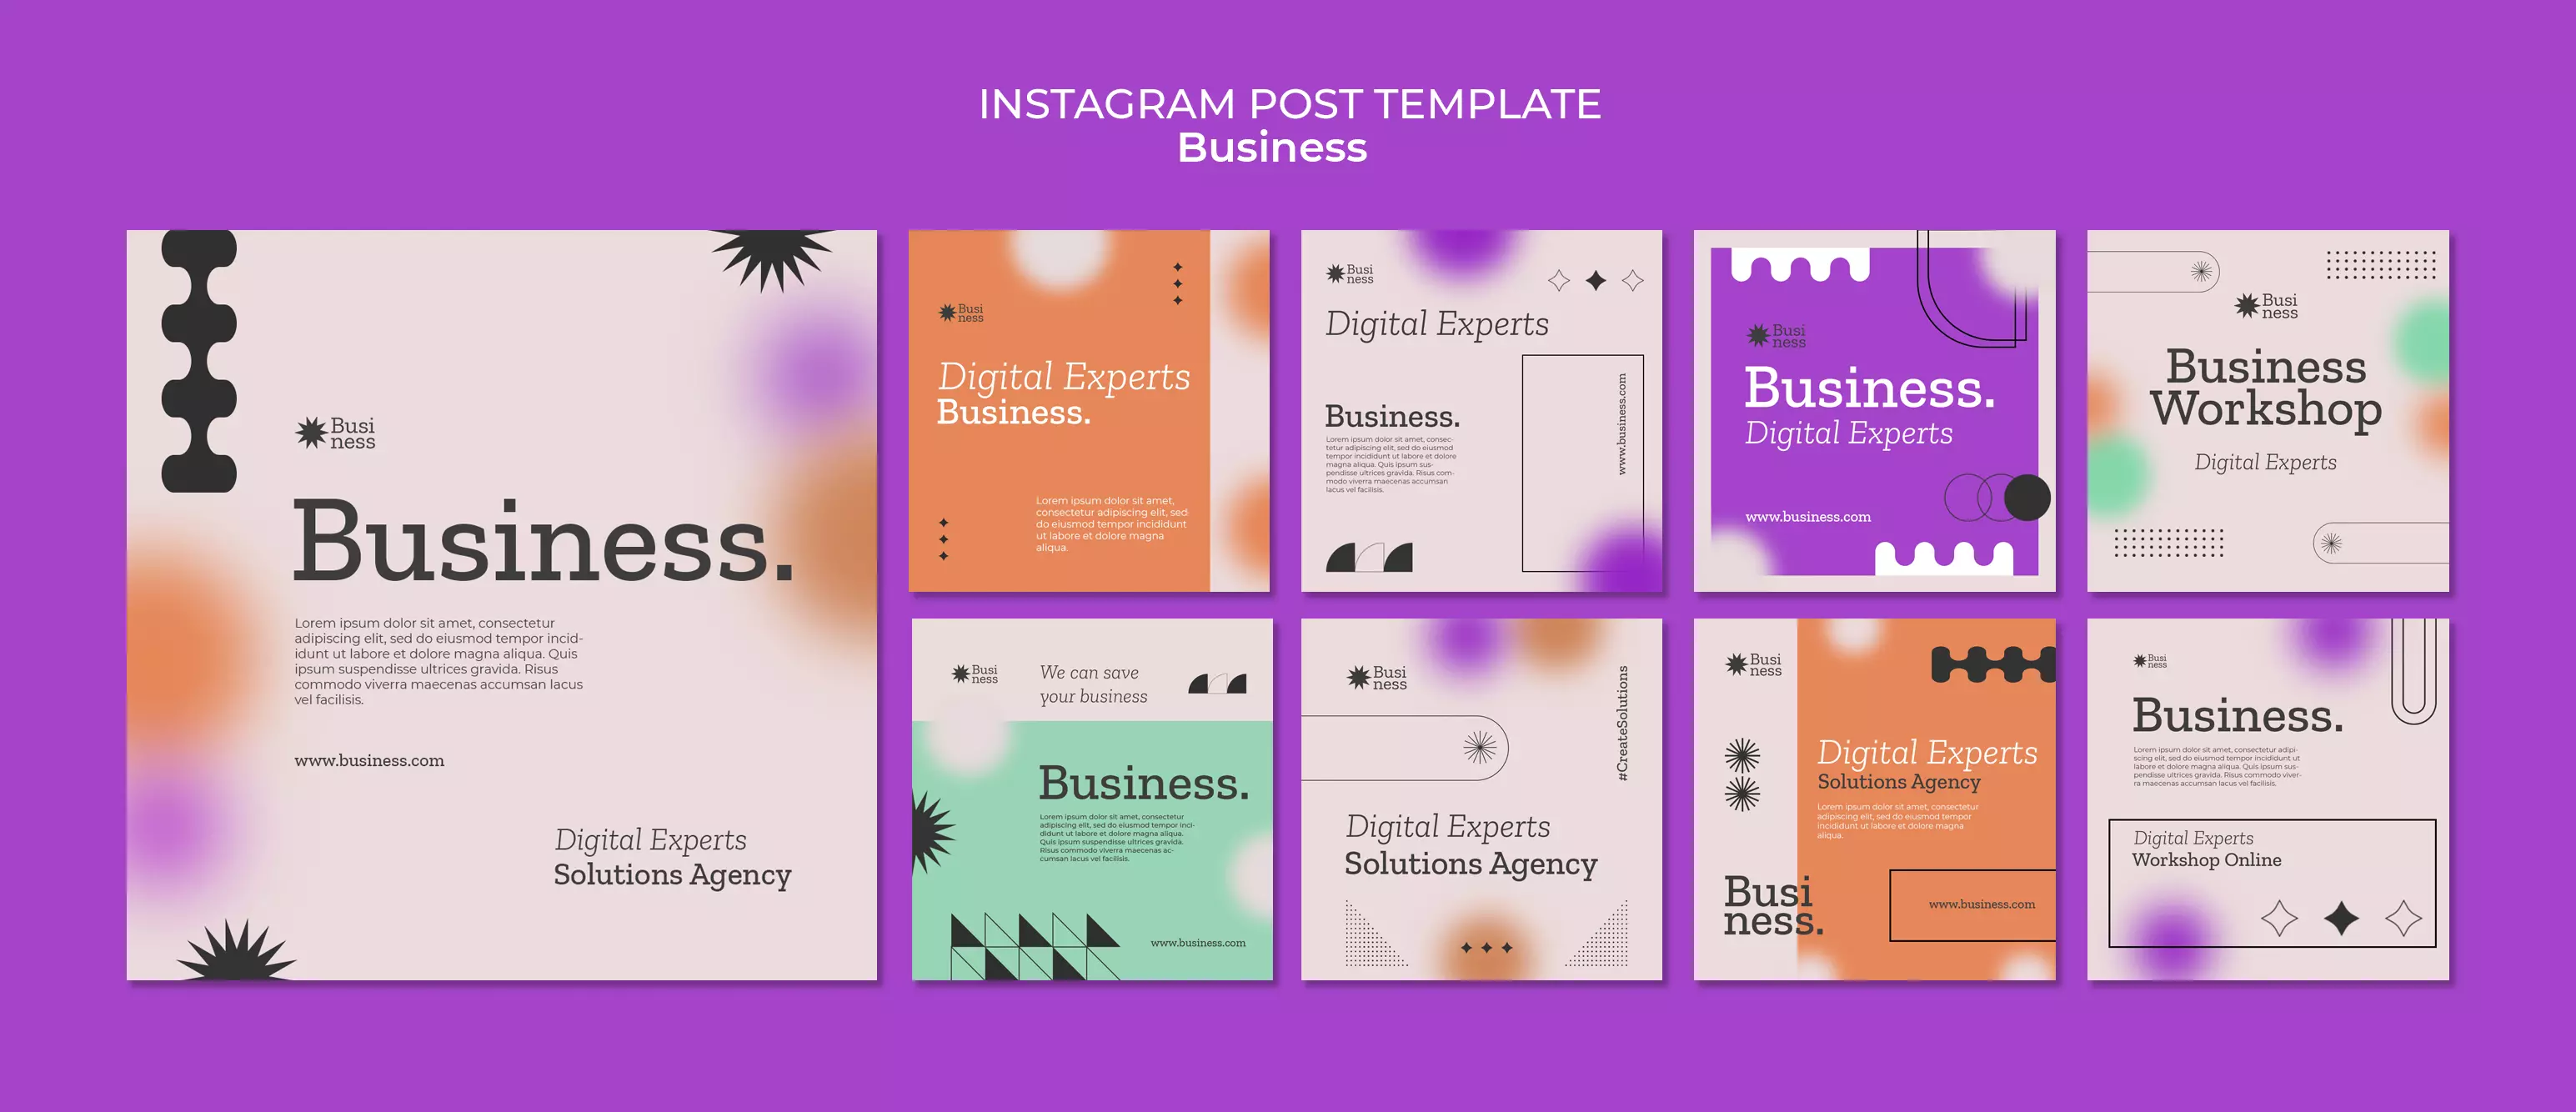 Templates for Instagram business posts with unique design